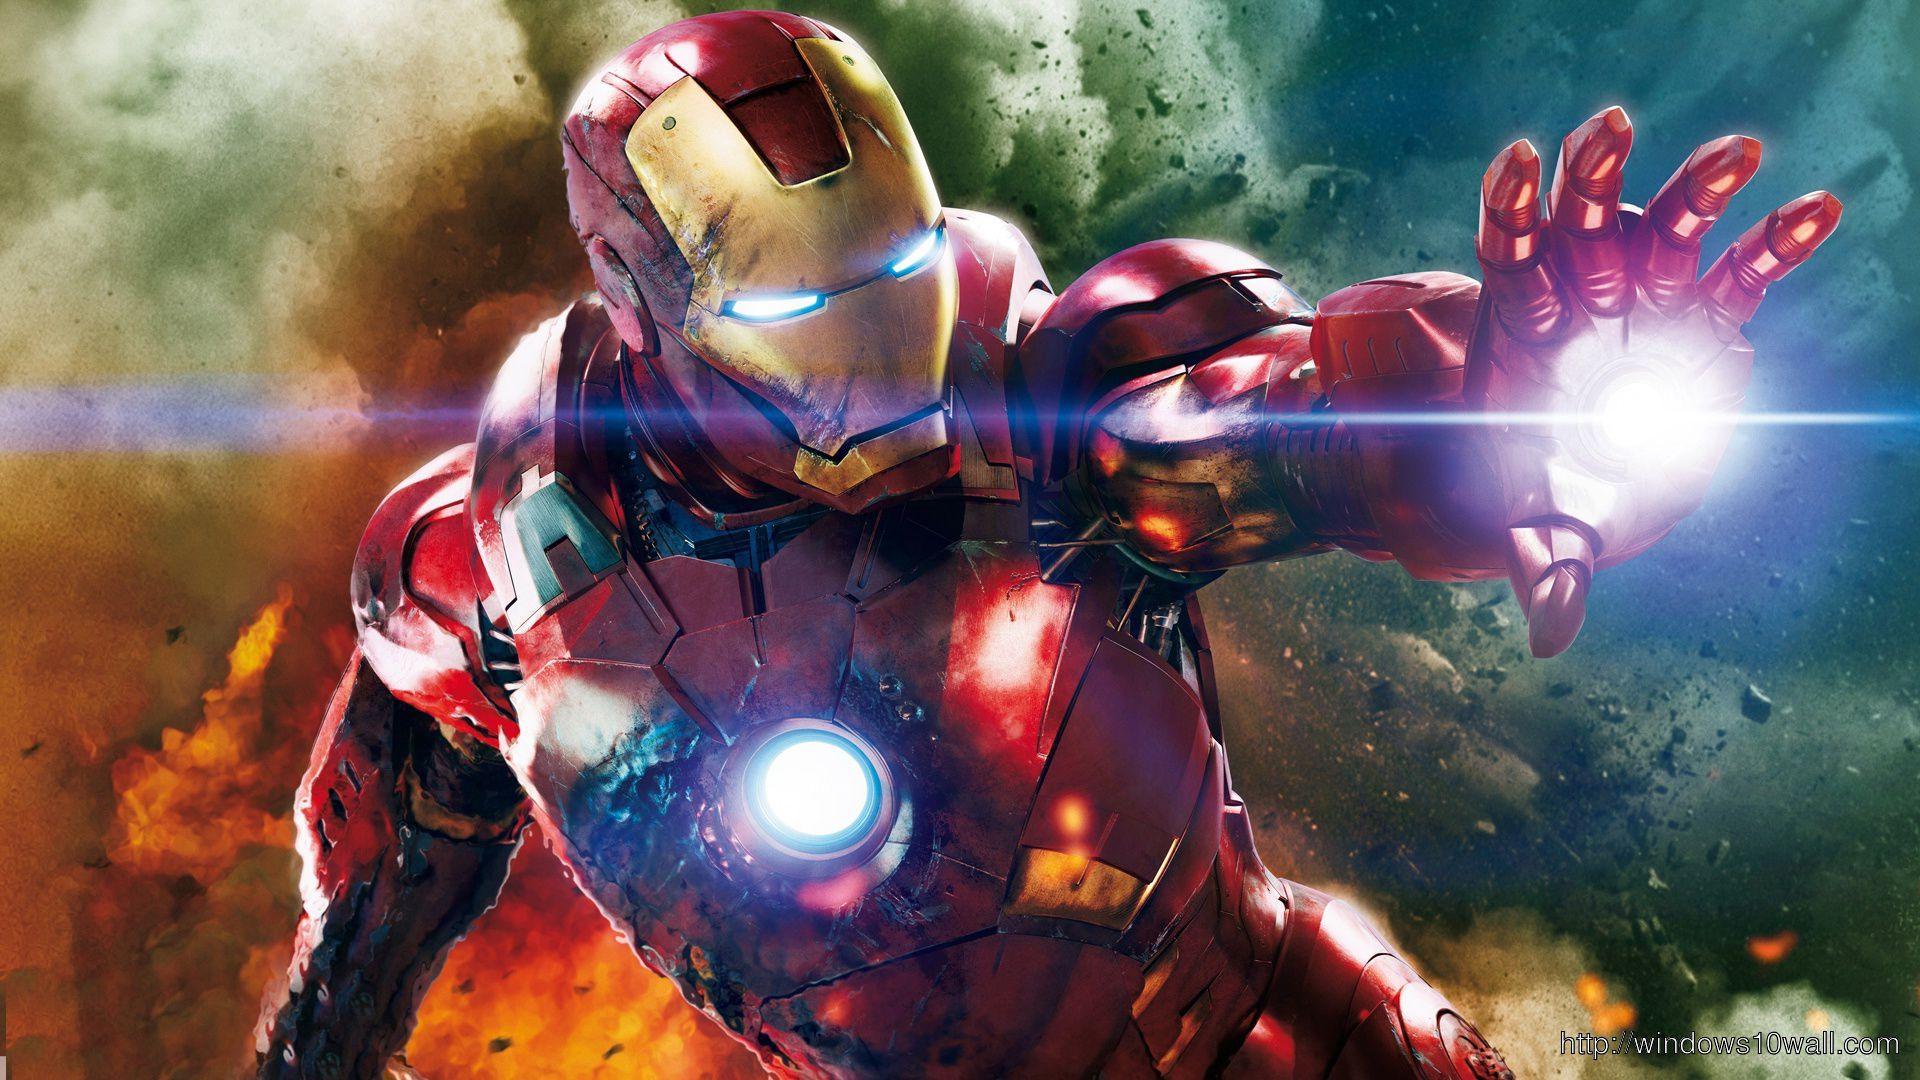 How Close Are We To Building A Real Life Iron Man Suit?